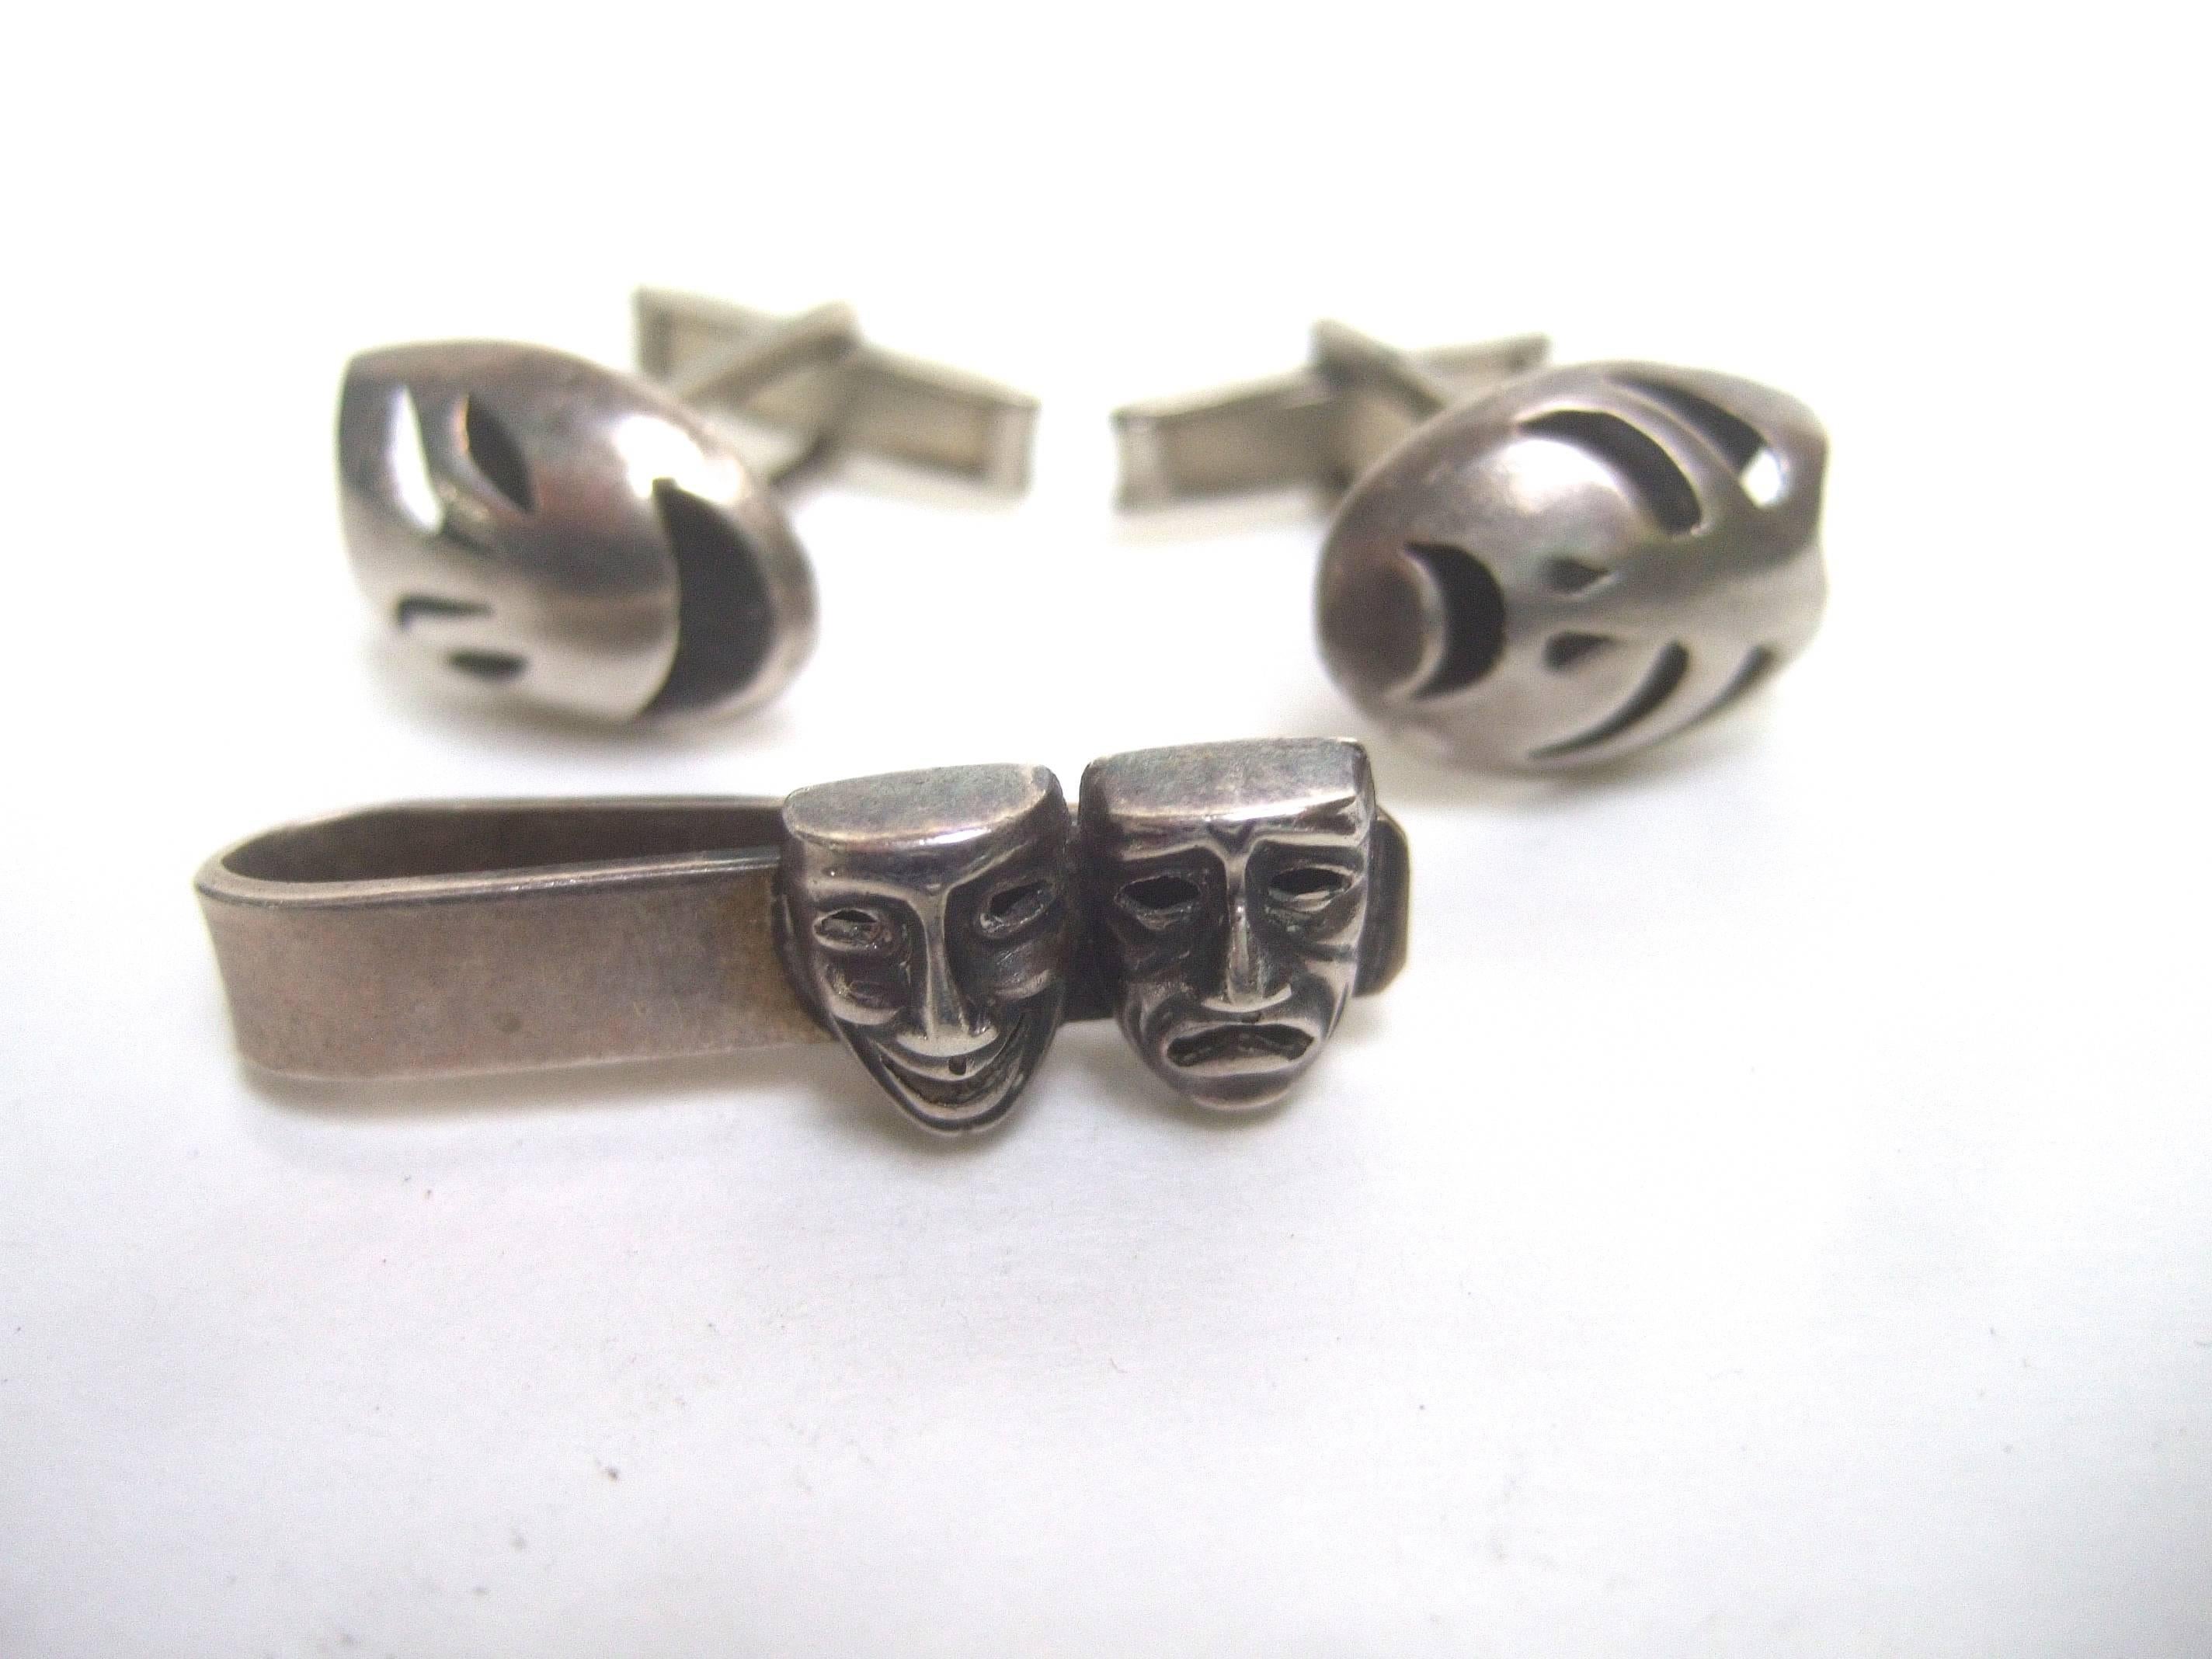 Mexican sterling thespian mask cuff links and tie bar c 1960
The unique set is designed with comedy and tragedy 
theatrical masks 

The thespian mask tie bar is slightly different 
in design then the cuff links mask design 

The back of the